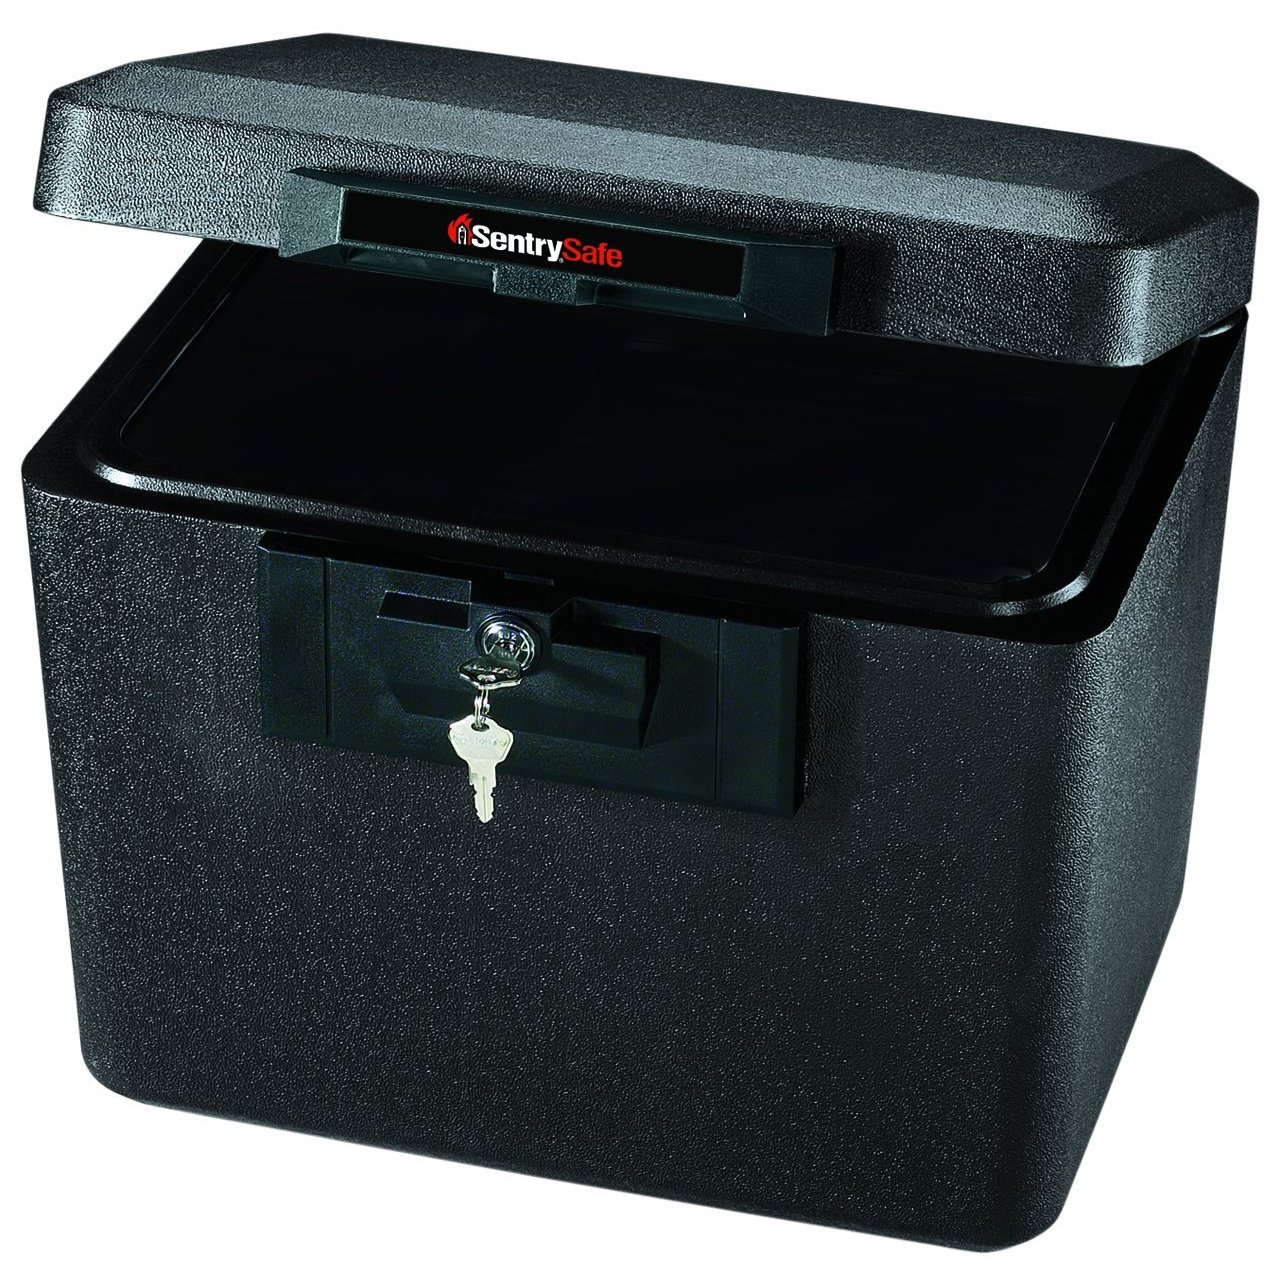 SentrySafe 1170 Small FireSafe - Fireproof Safes For Home And Office